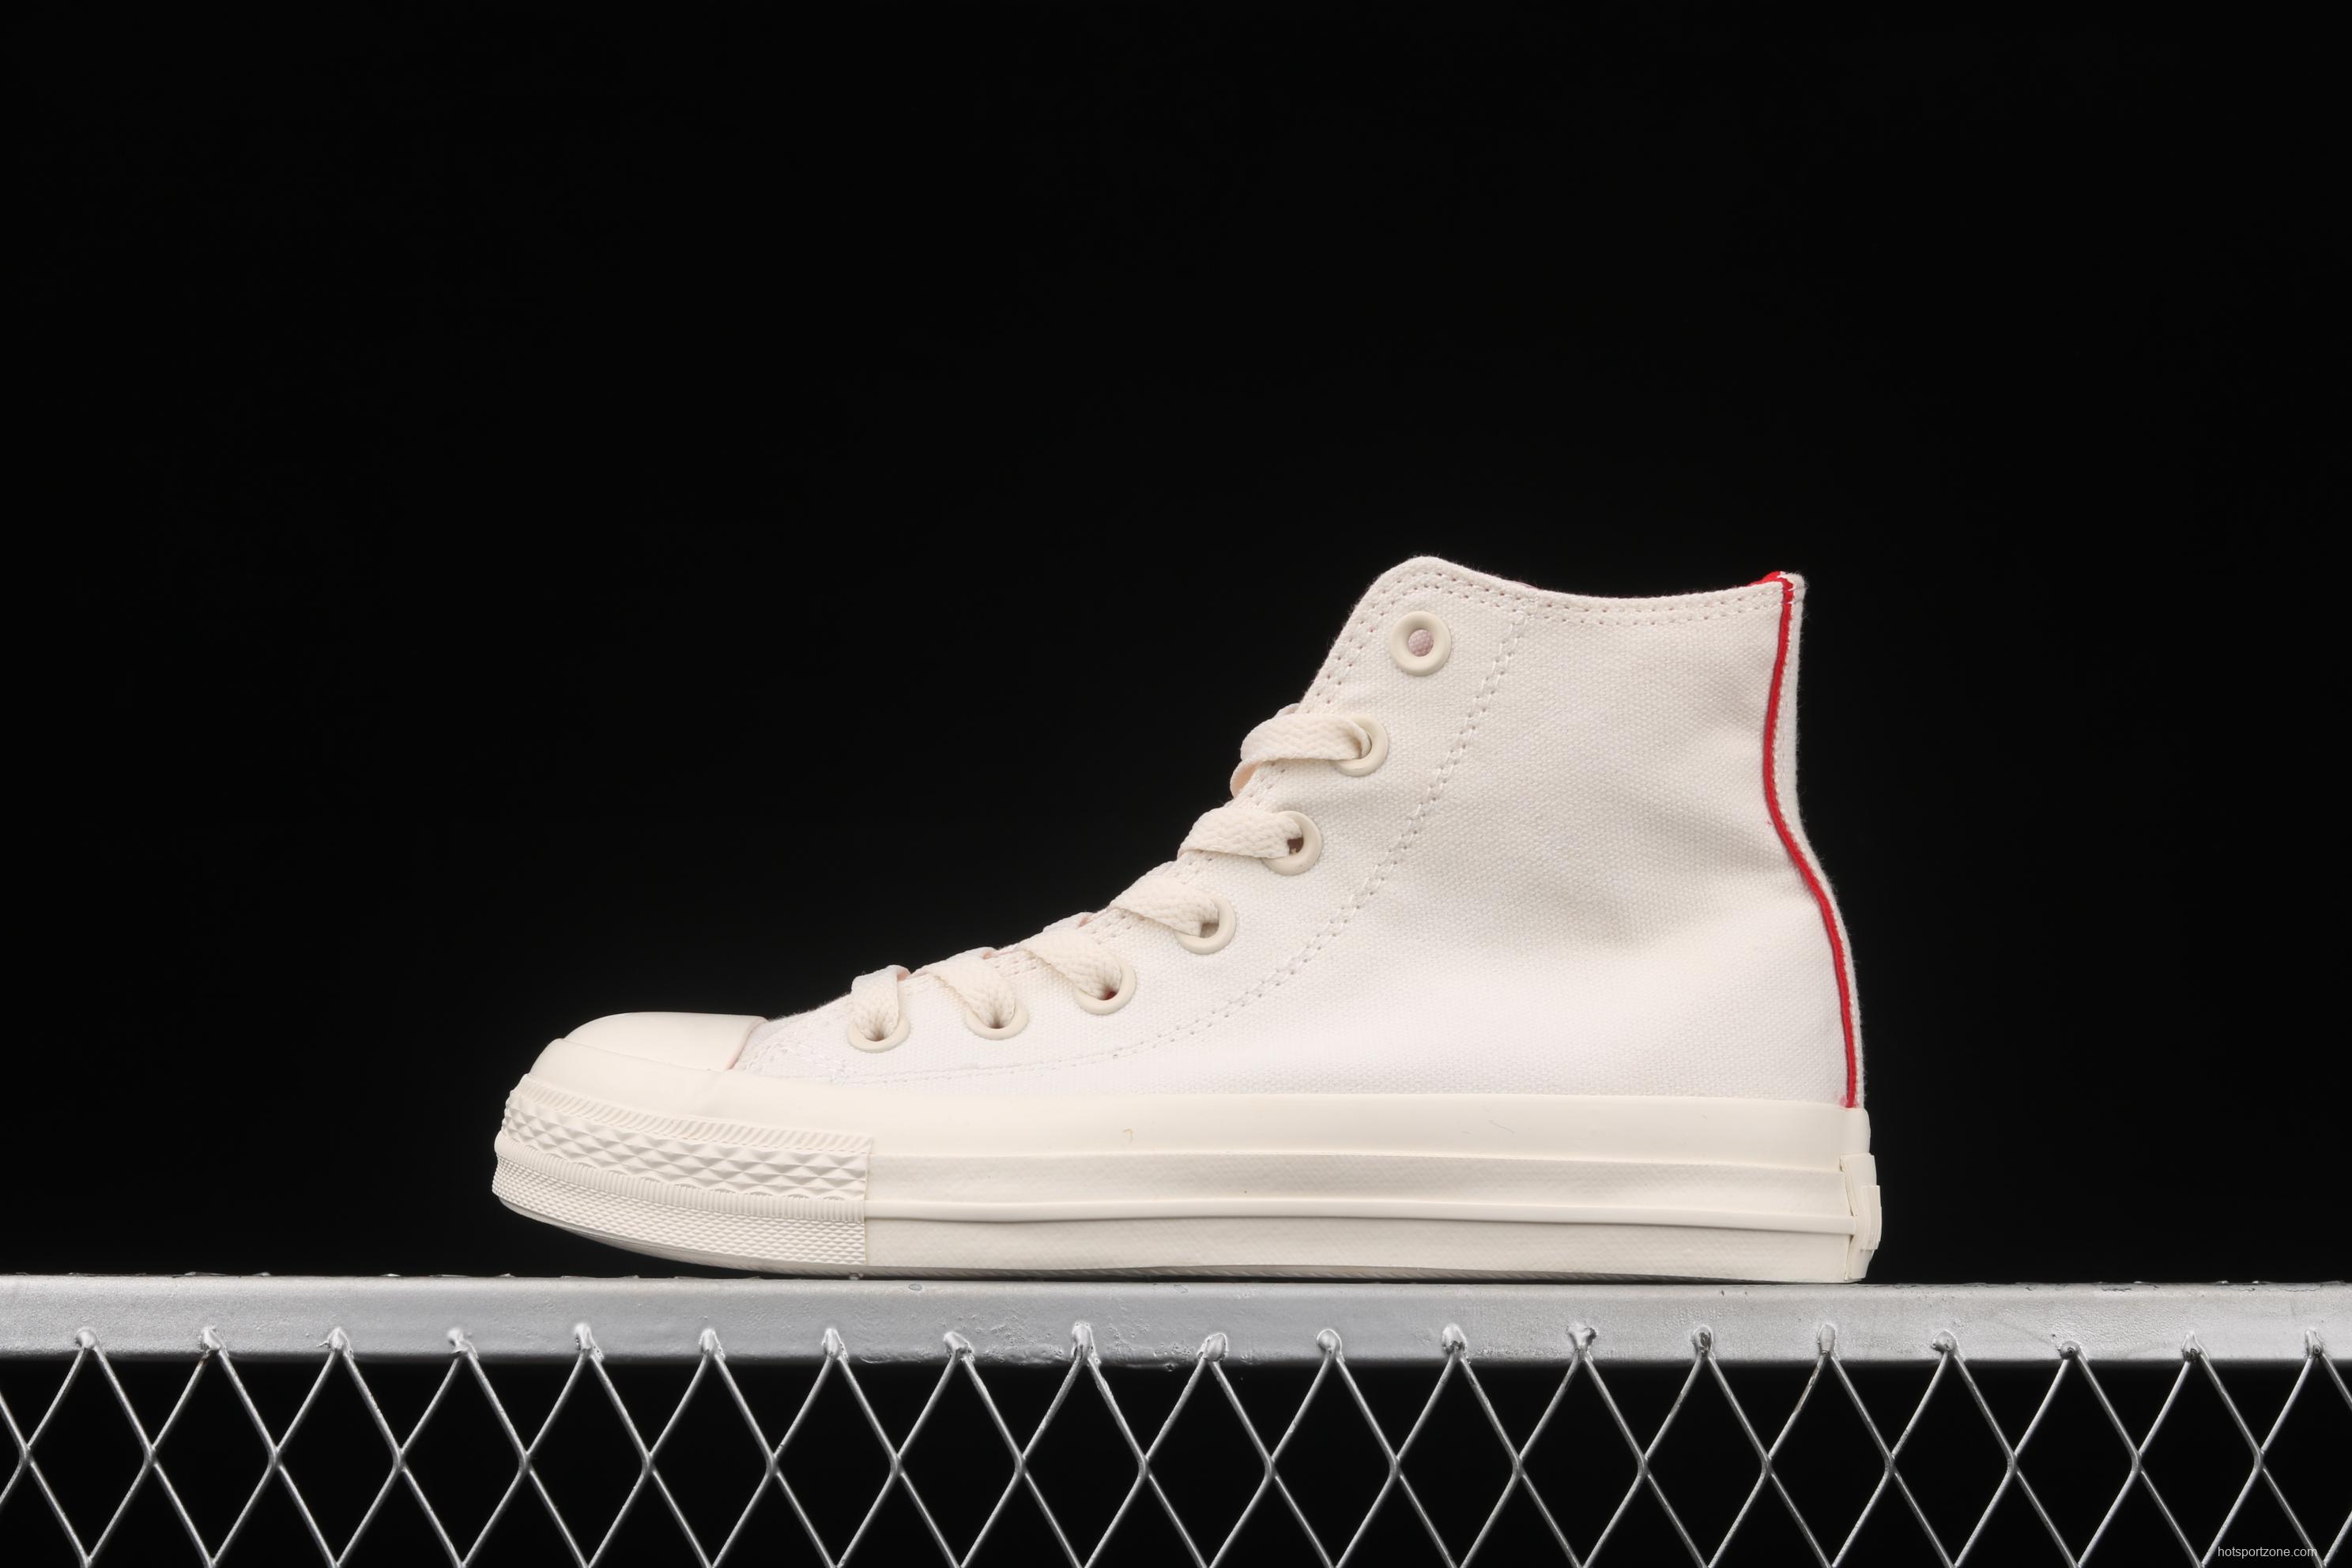 Converse All star Cosmoinwhite Japanese limited summer milk white color high-top casual board shoes 1SC507